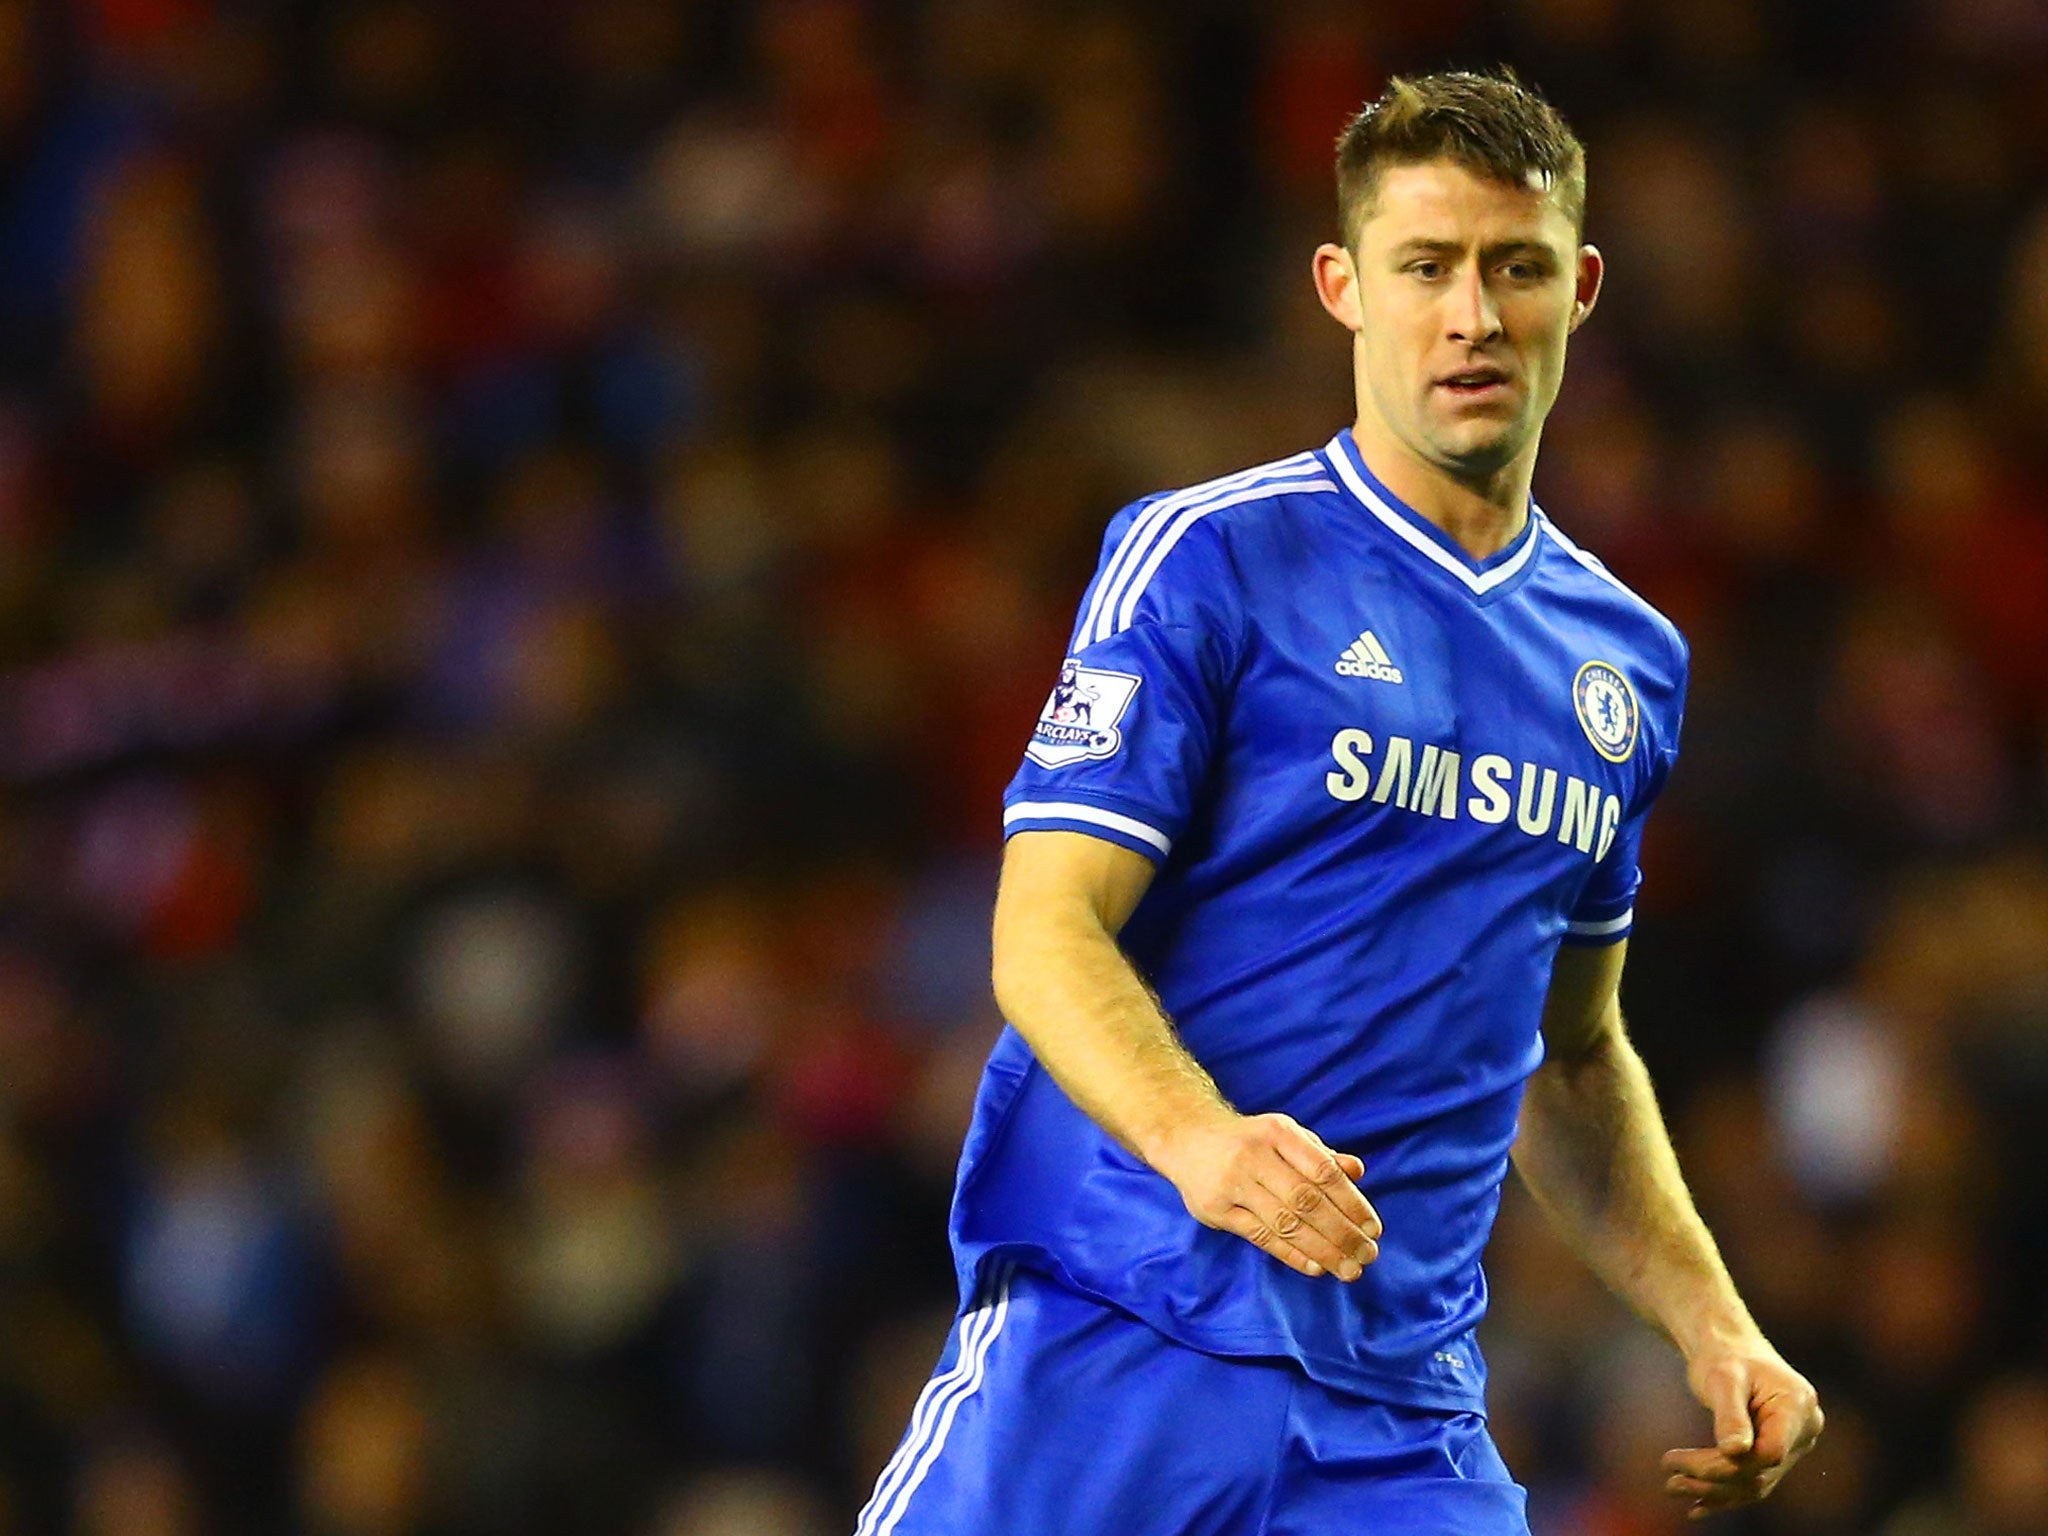 Gary Cahill has bemoaned Chelsea's 3-2 defeat to Stoke at the weekend